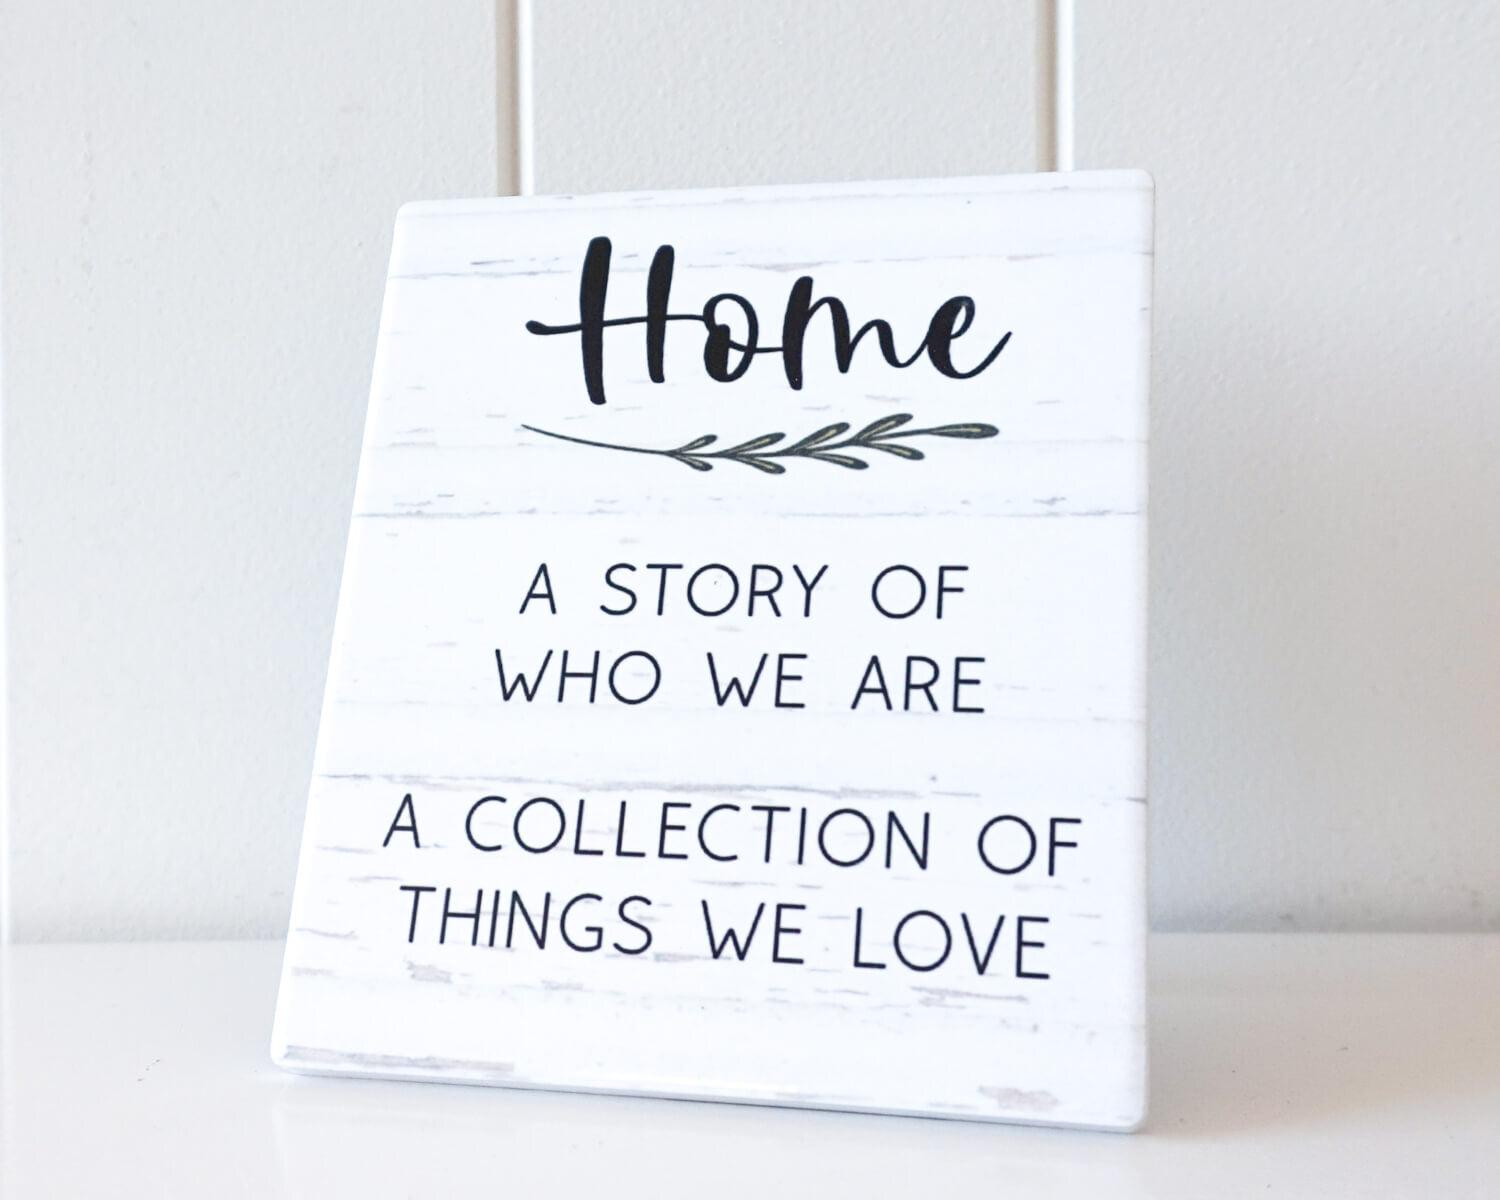 Making the perfect gift, our standing plaques have quirky quotes, or loving sentiments - Ceramic standing plaque - Cute quote - Wide range across the collection - Perfect for up sells/gift items Purchase in multiples of 2 - Plaque Measures 12cm x 14cm